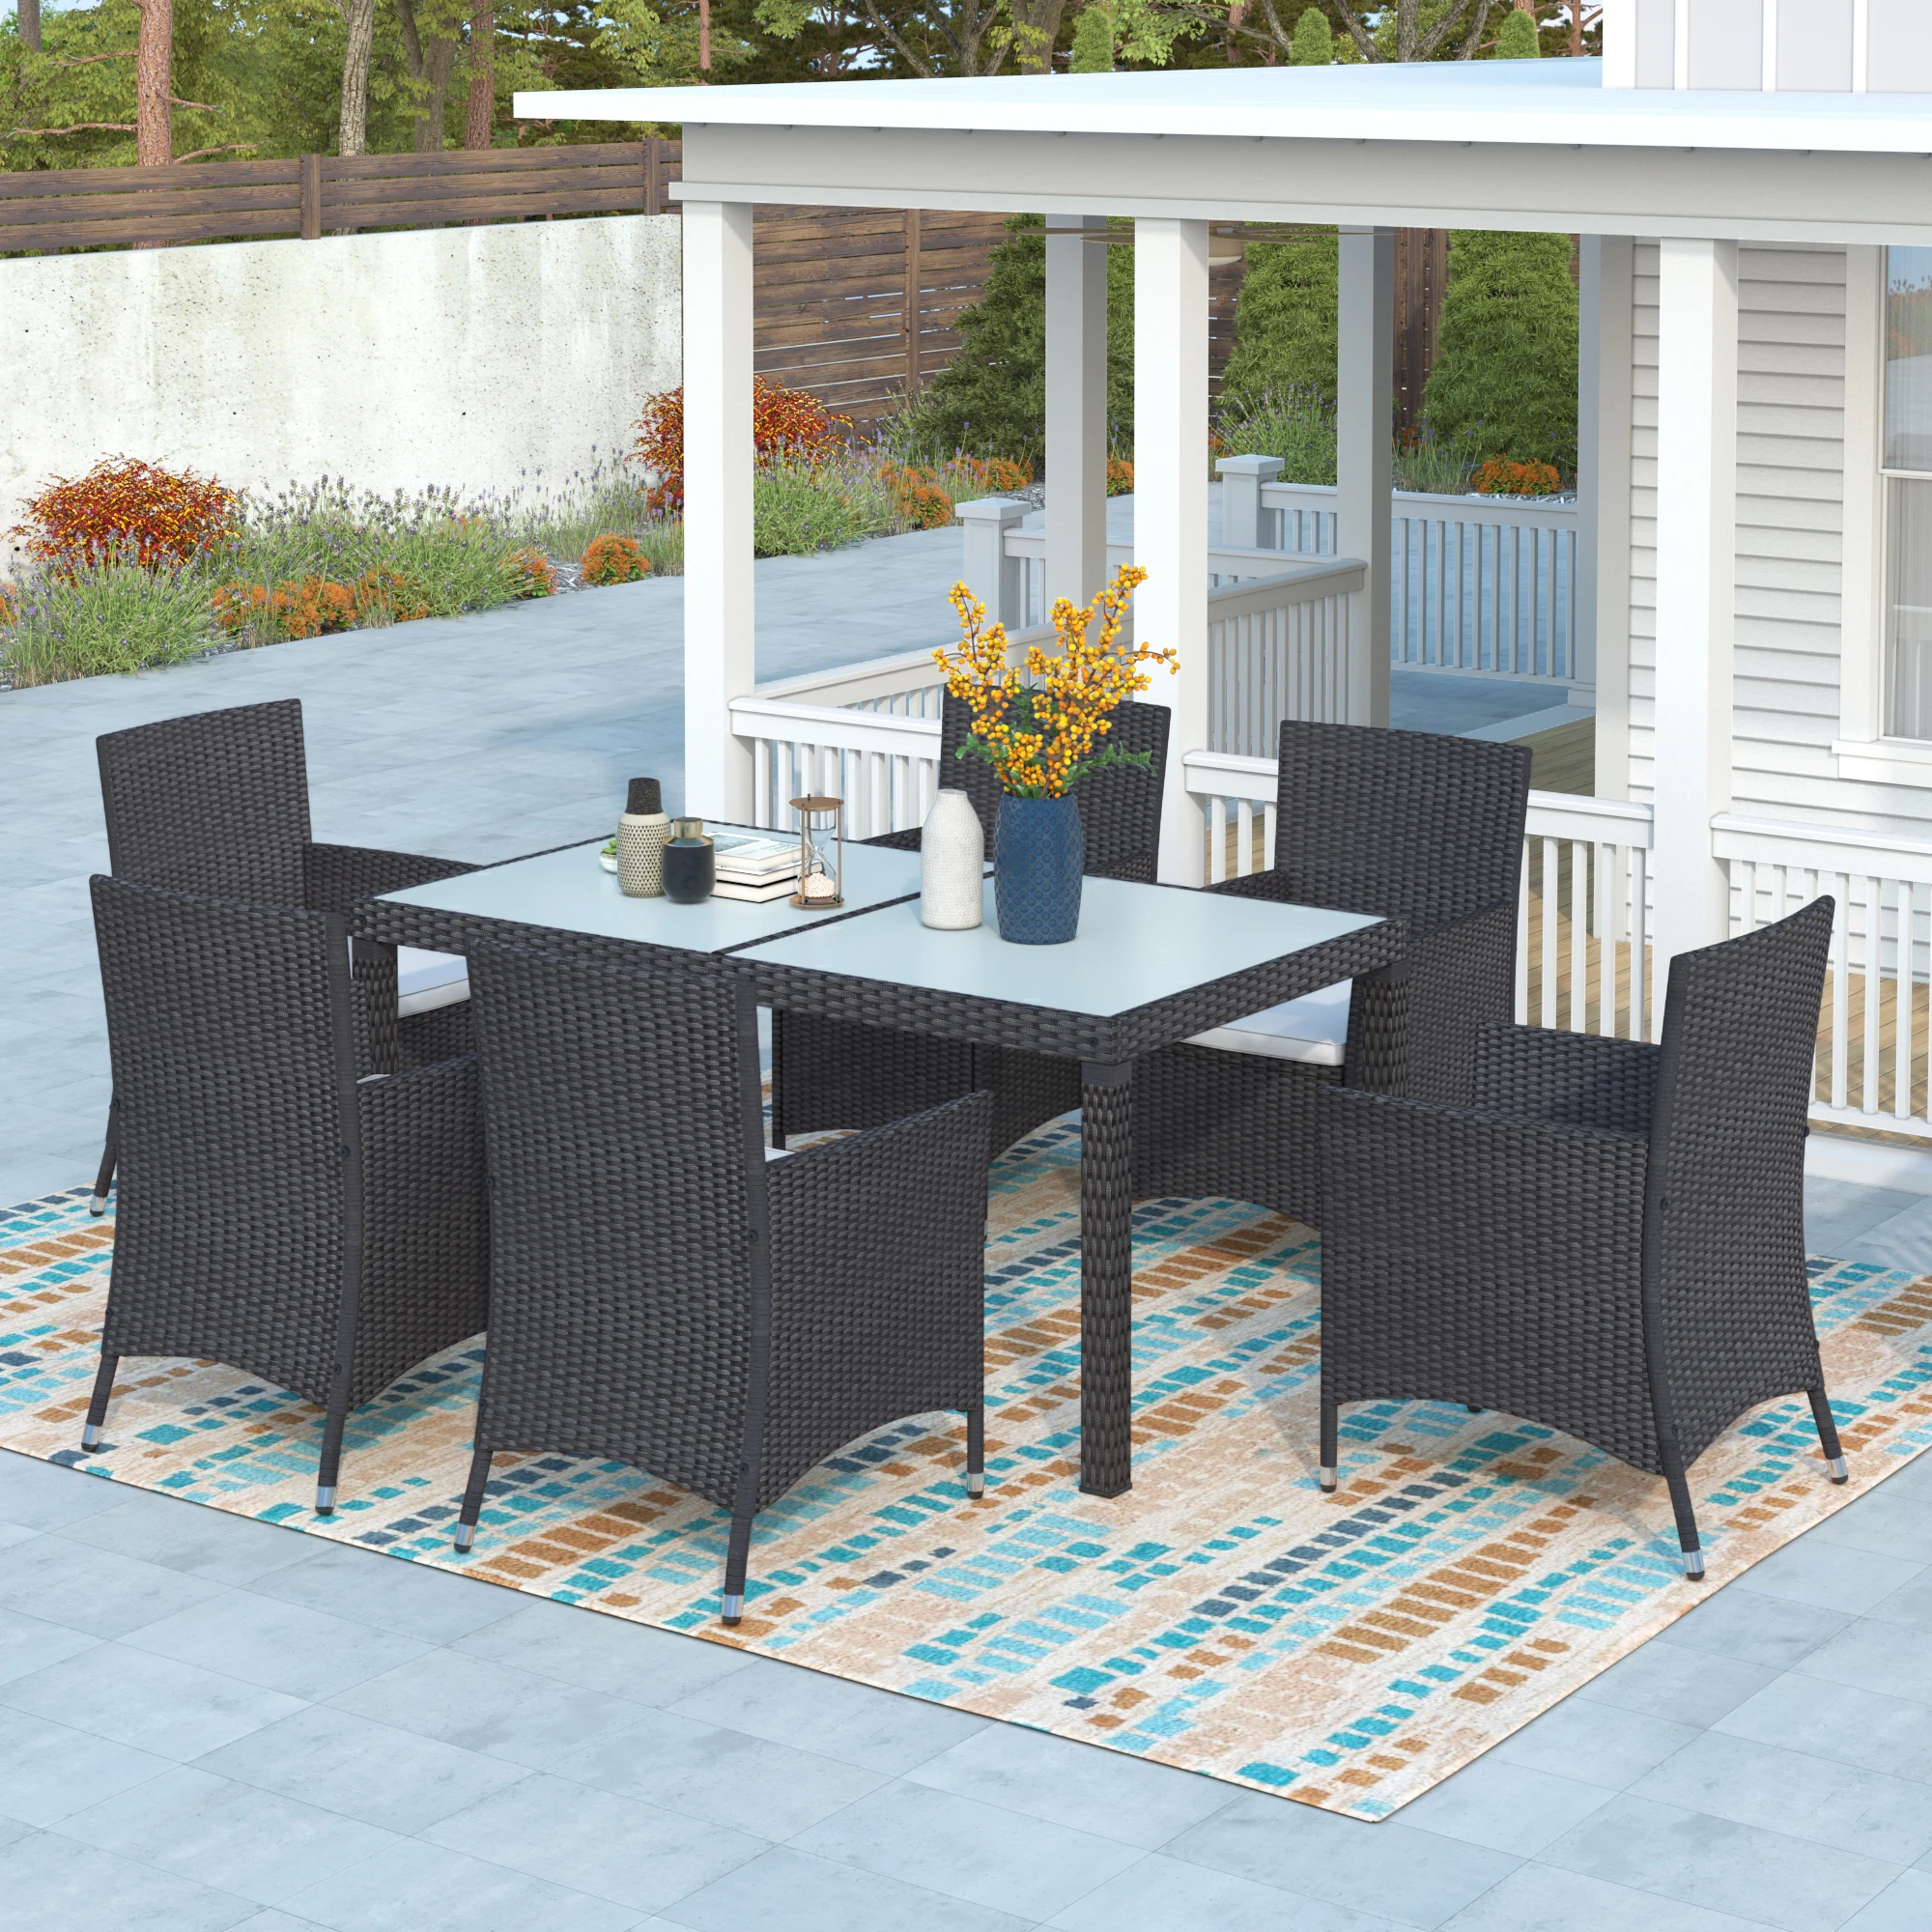 7Pcs Outdoor Wicker Dining Set Black Rattan Patio Furniture Set with Beige Cushion Include 6 Armchairs 1 Table[US-Stock]